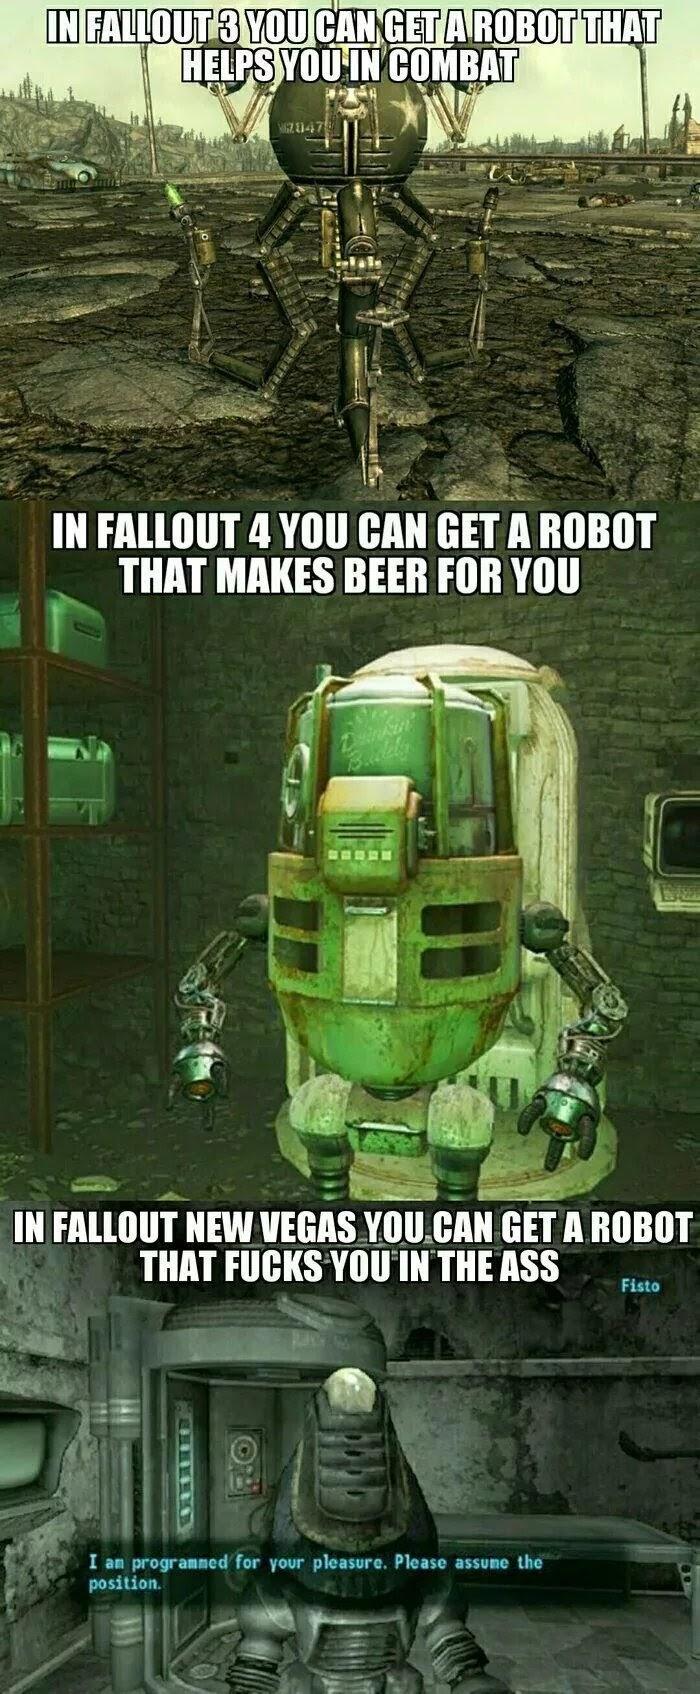 fallout fisto meme - In Fallout 3 You Can Get A Robotthat Helps You In Combat In Fallout 4 You Can Get A Robot That Makes Beer For You In Fallout New Vegas You Can Get A Robot That Fucks You In The Ass Fisto I am programmed for your pleasure. Please assum